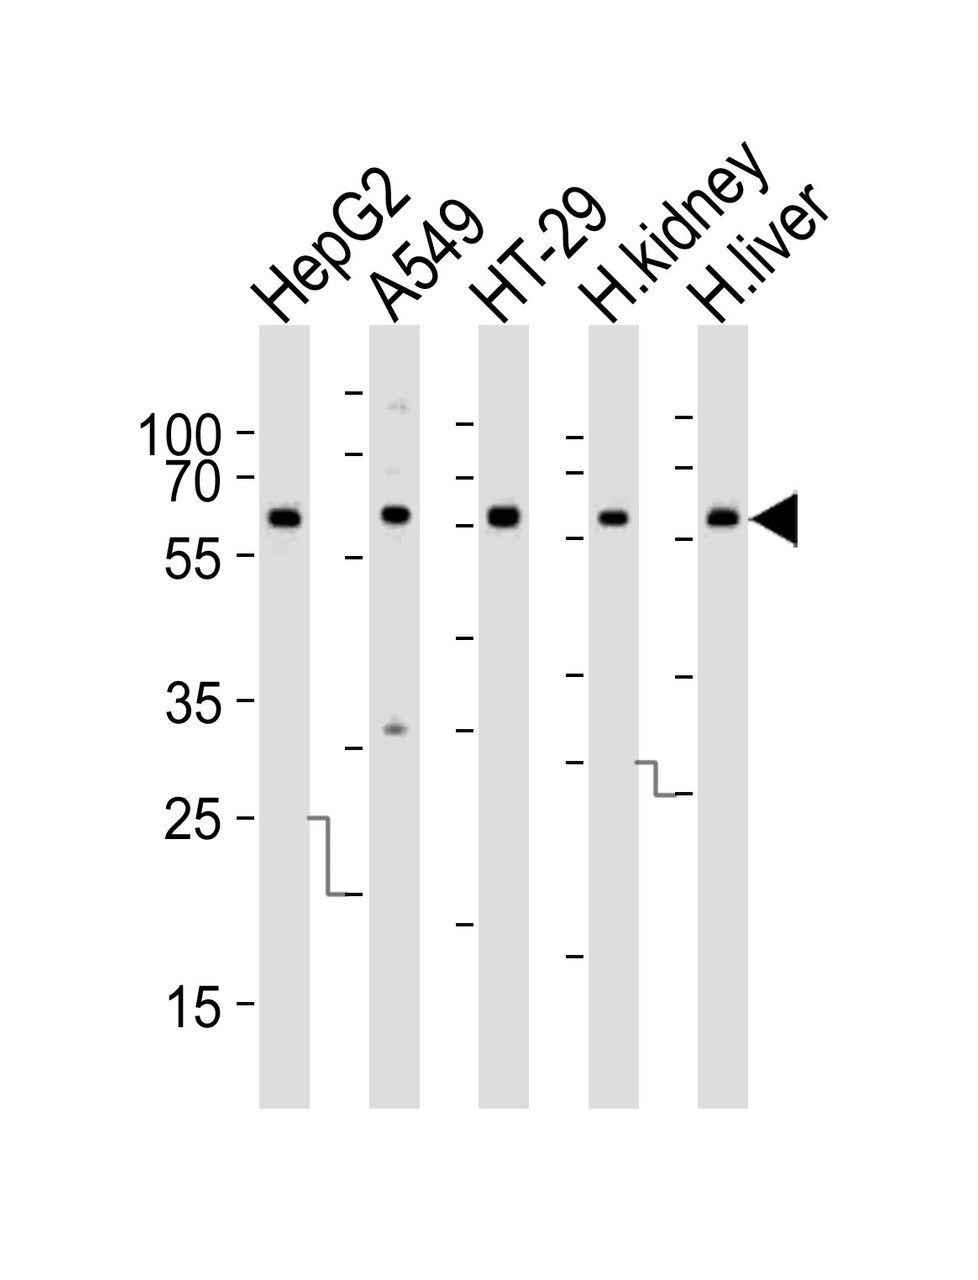 Western blot analysis of lysates from HepG2, A549, HT-29 cell line, human kidney and liver tissue lysate (from left to right) , using CYP3A4 Antibody at 1:1000 at each lane.